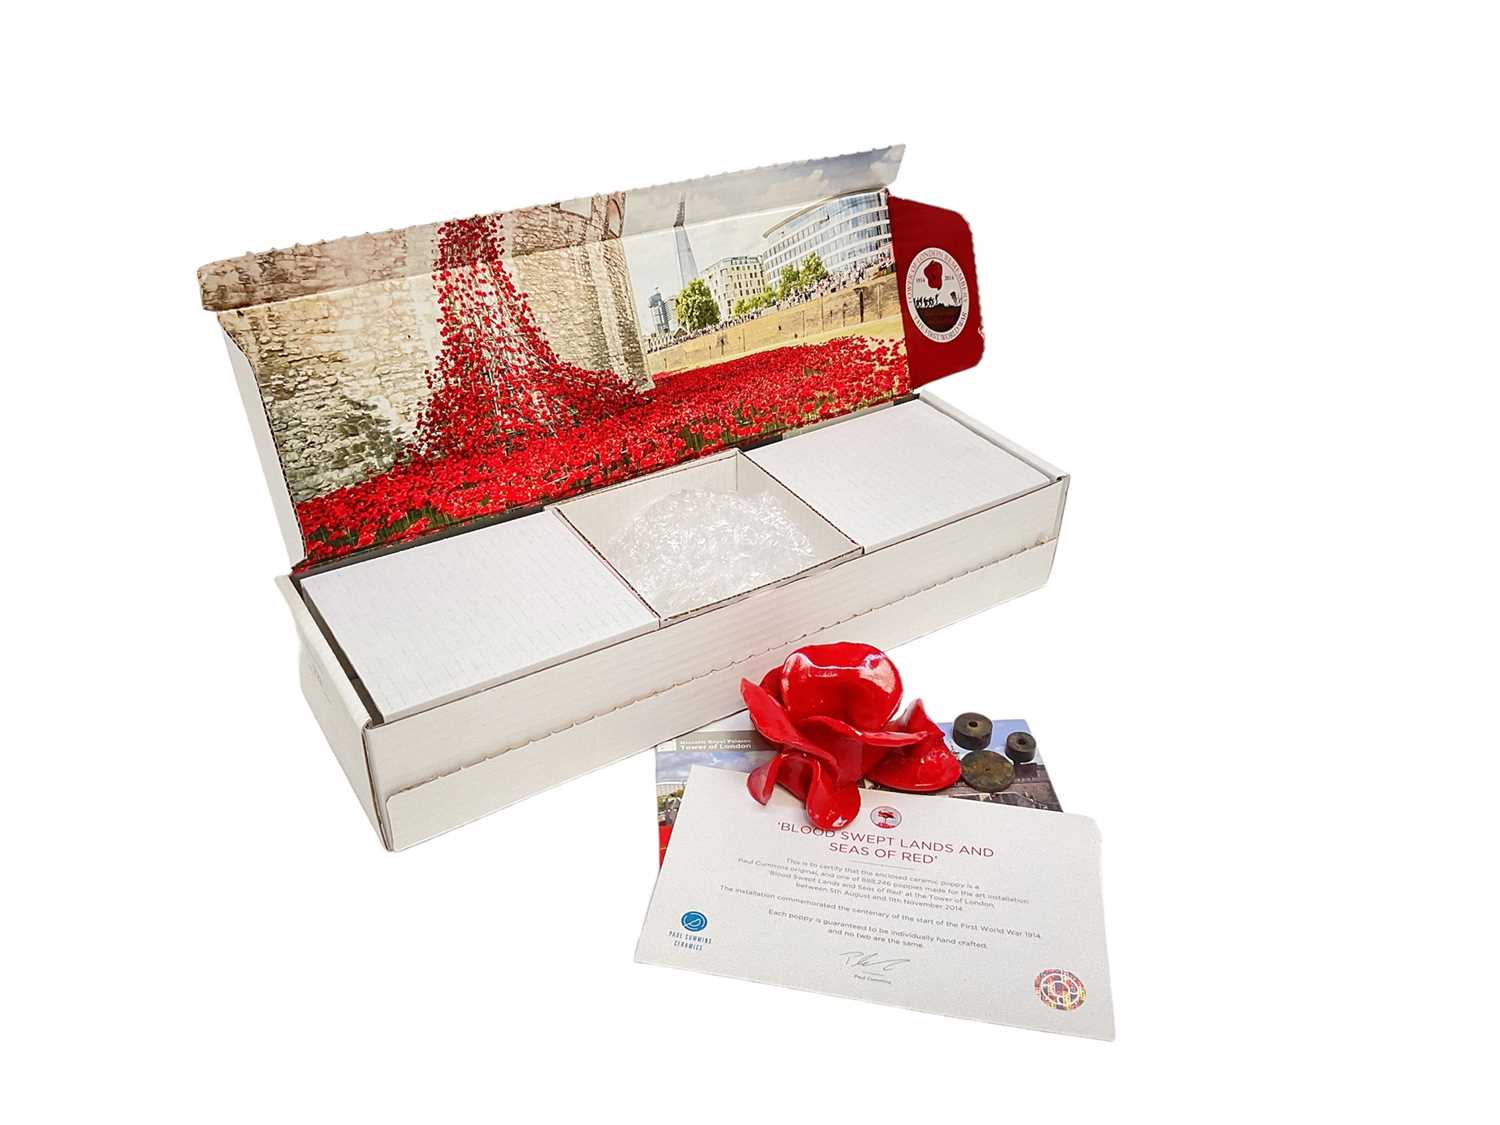 Lot 723 - Paul Cummins Tower of London ceramic poppy, one of 888,246 placed outside the Tower of London in 2014 to marks the centenary of the First World War, in original box with paperwork.